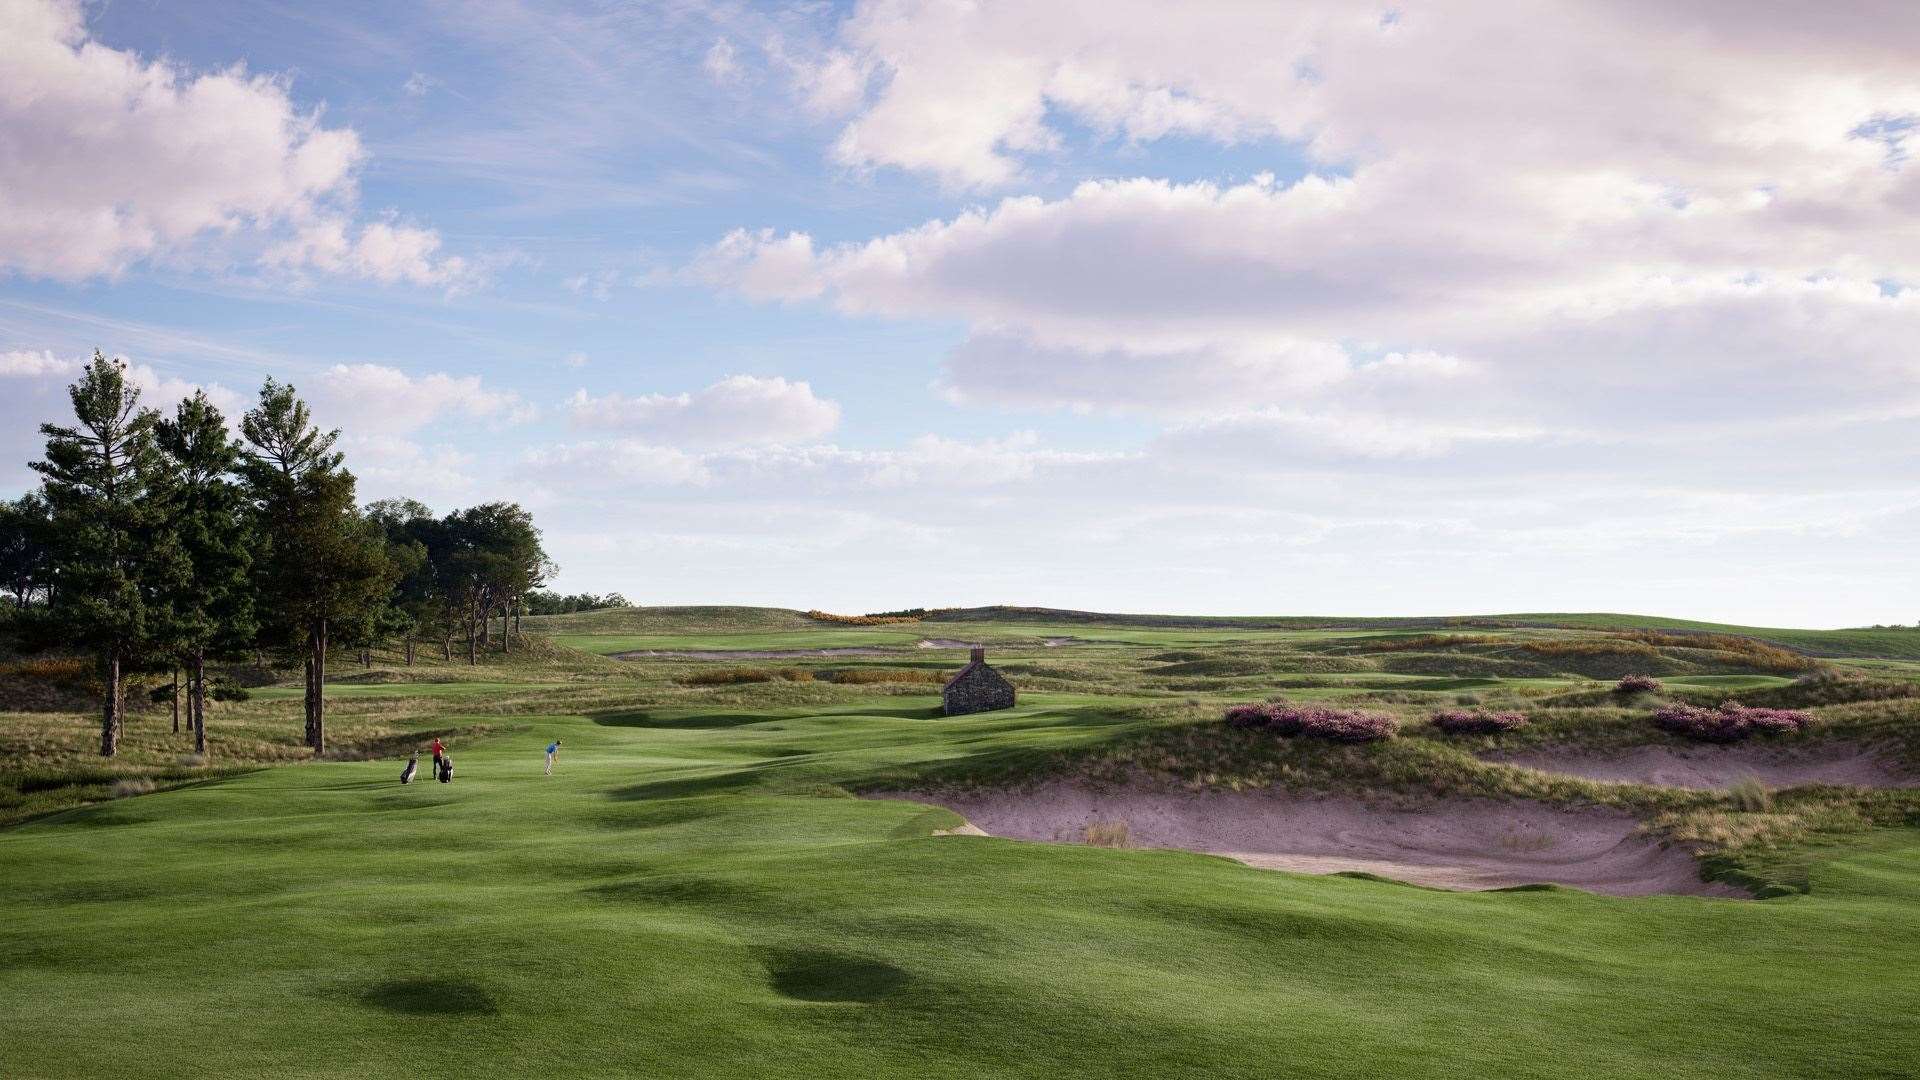 An artist's impression of the fifth hole at Cabot Highlands' new Old Petty course. Rendered by: Harris Kalinka, Picture: Cabot Highlands website